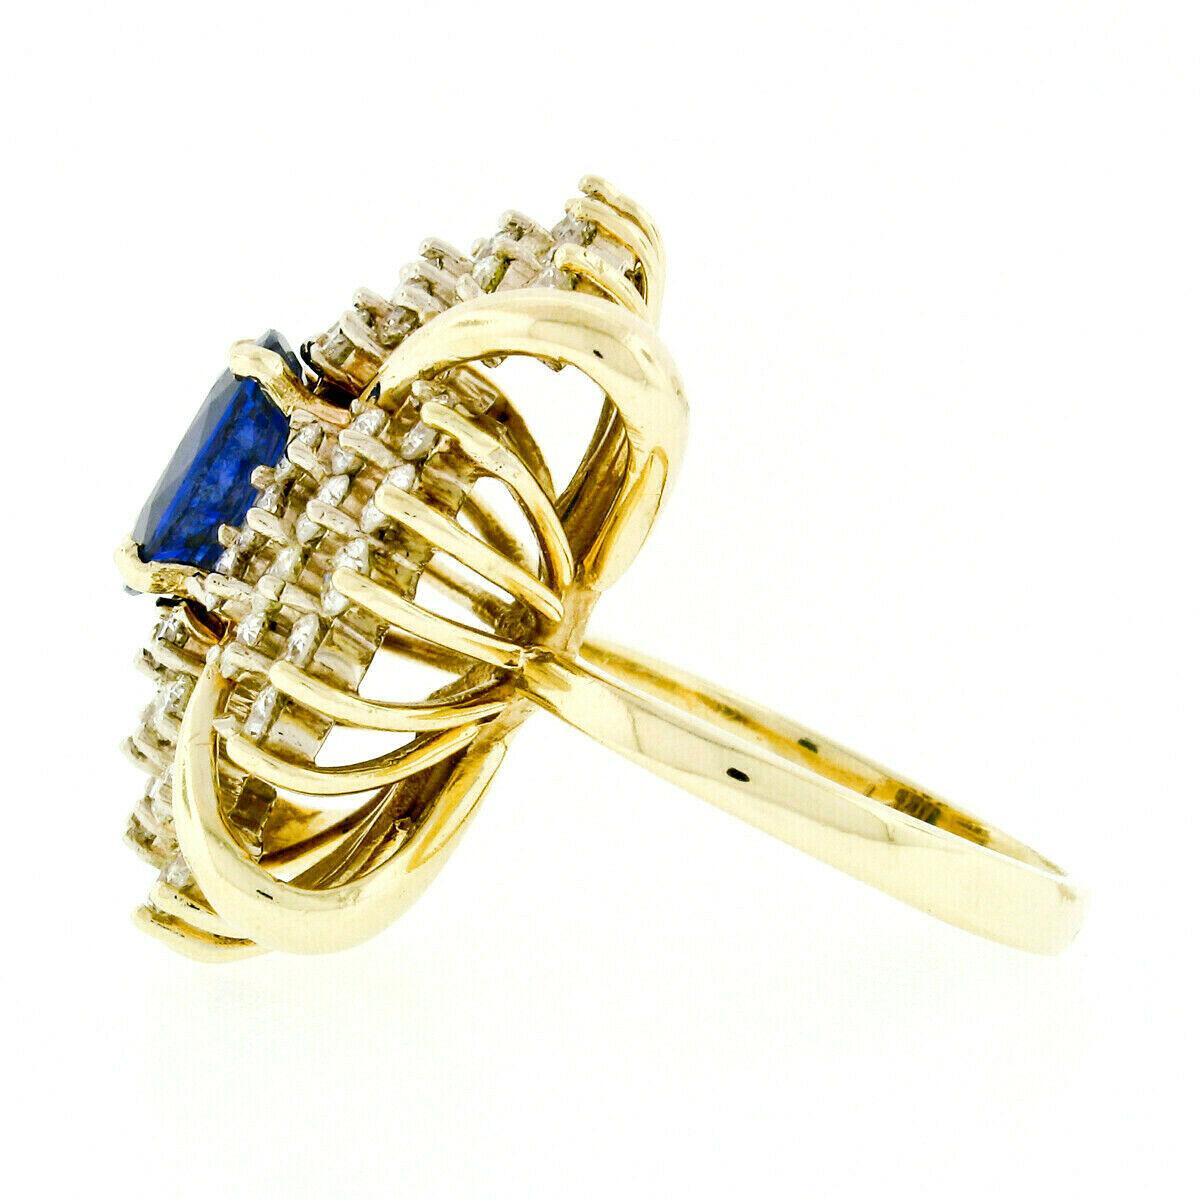 Large Vintage 14k Gold 6.24ctw GIA Oval Ceylon Sapphire & Diamond Cocktail Ring For Sale 2